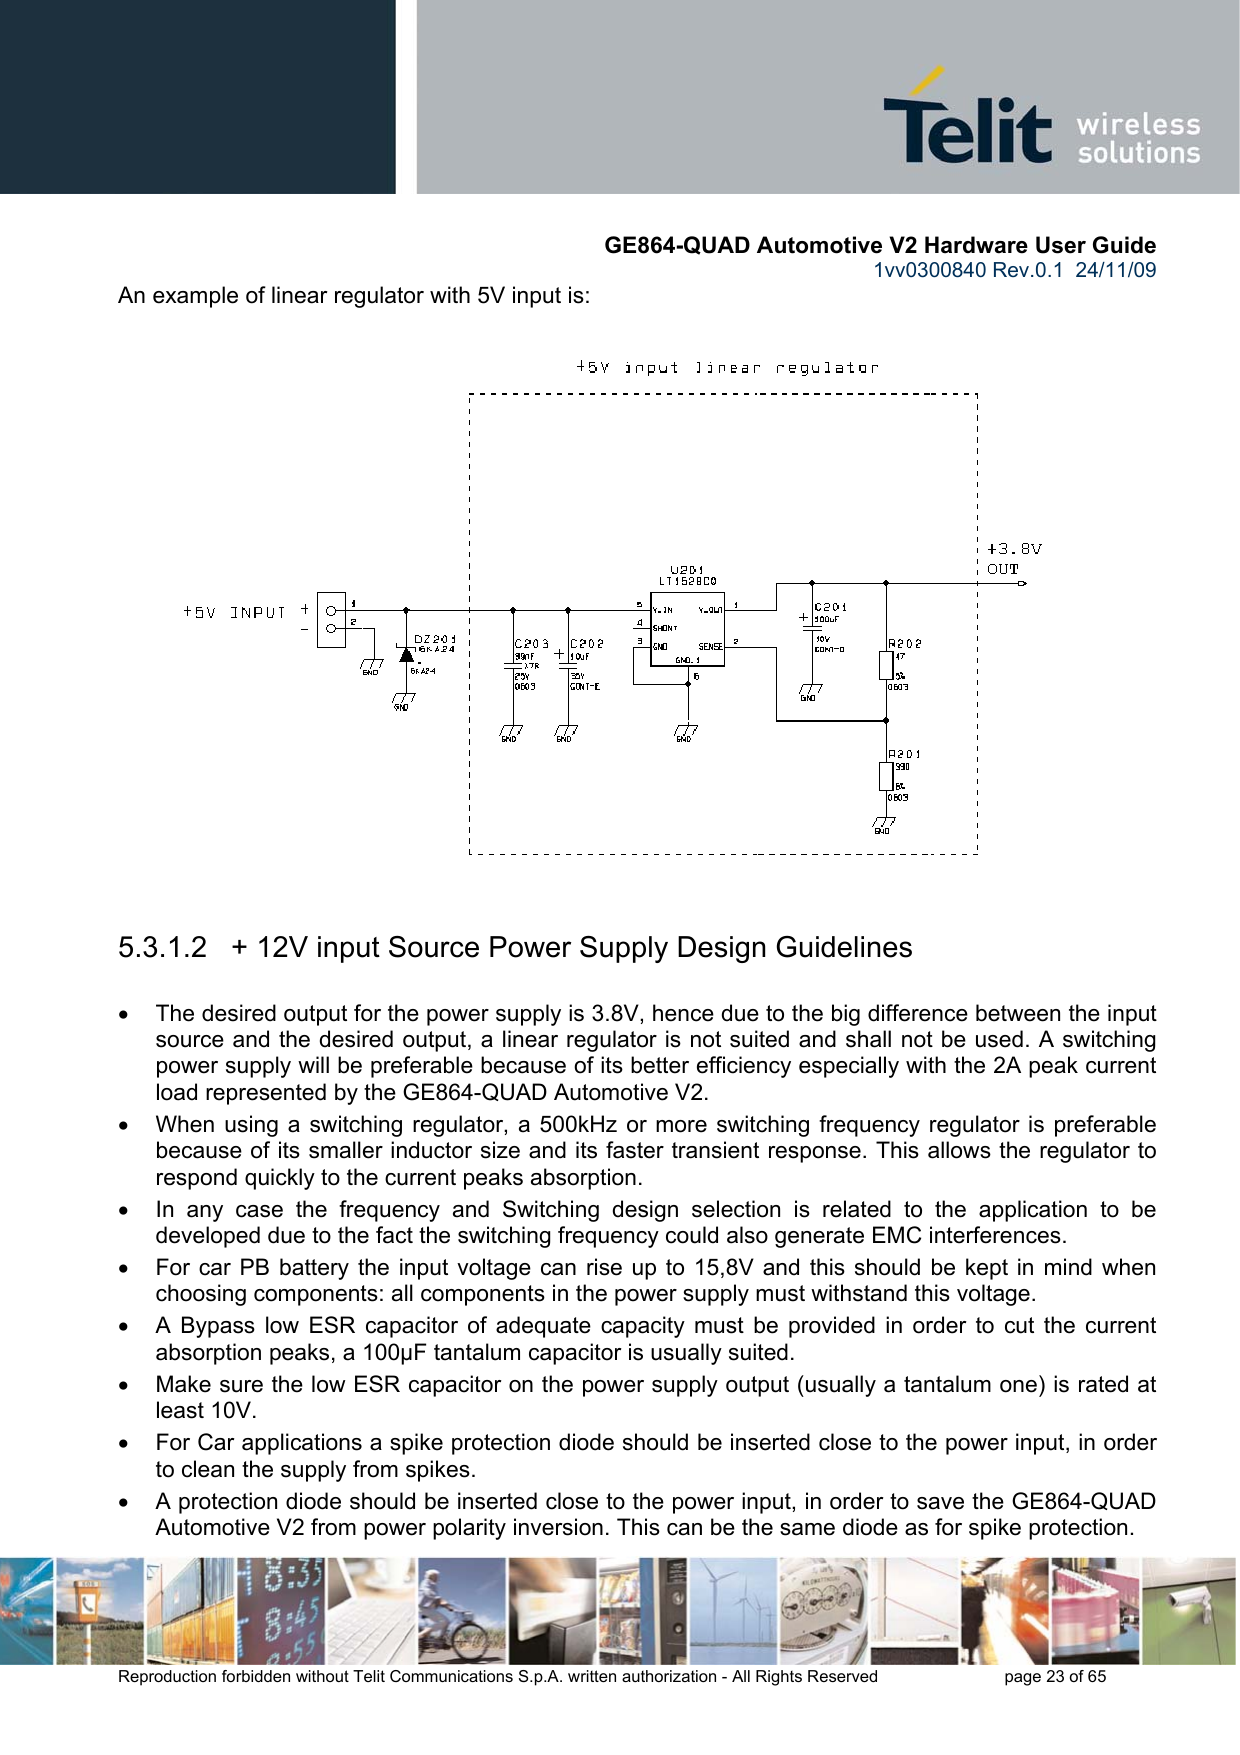       GE864-QUAD Automotive V2 Hardware User Guide 1vv0300840 Rev.0.1  24/11/09      Reproduction forbidden without Telit Communications S.p.A. written authorization - All Rights Reserved    page 23 of 65  An example of linear regulator with 5V input is:    5.3.1.2   + 12V input Source Power Supply Design Guidelines  •  The desired output for the power supply is 3.8V, hence due to the big difference between the input source and the desired output, a linear regulator is not suited and shall not be used. A switching power supply will be preferable because of its better efficiency especially with the 2A peak current load represented by the GE864-QUAD Automotive V2. •  When using a switching regulator, a 500kHz or more switching frequency regulator is preferable because of its smaller inductor size and its faster transient response. This allows the regulator to respond quickly to the current peaks absorption.  •  In any case the frequency and Switching design selection is related to the application to be developed due to the fact the switching frequency could also generate EMC interferences. •  For car PB battery the input voltage can rise up to 15,8V and this should be kept in mind when choosing components: all components in the power supply must withstand this voltage. •  A Bypass low ESR capacitor of adequate capacity must be provided in order to cut the current absorption peaks, a 100μF tantalum capacitor is usually suited. •  Make sure the low ESR capacitor on the power supply output (usually a tantalum one) is rated at least 10V. •  For Car applications a spike protection diode should be inserted close to the power input, in order to clean the supply from spikes.  •  A protection diode should be inserted close to the power input, in order to save the GE864-QUAD Automotive V2 from power polarity inversion. This can be the same diode as for spike protection. 